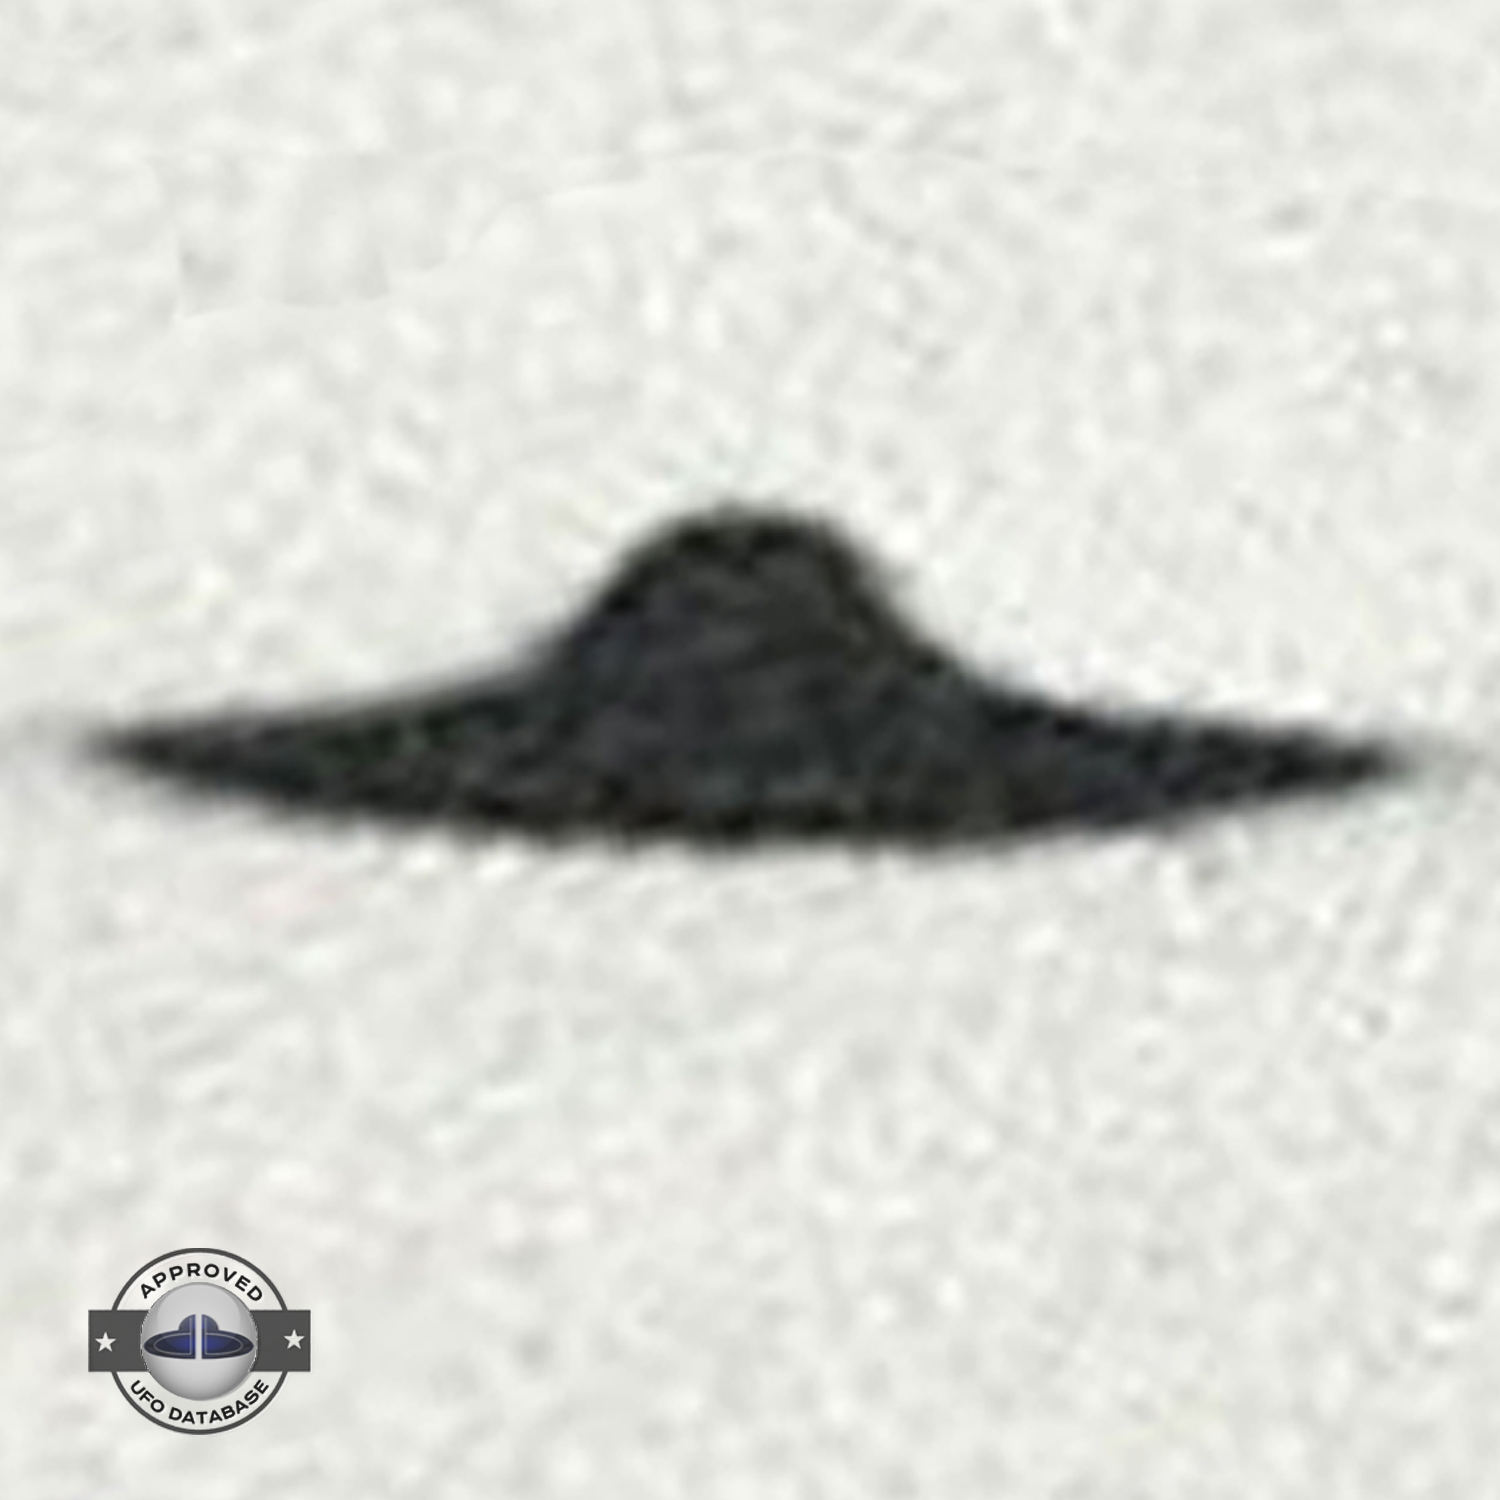 UFO picture lack of three dimensional aspect. 3 UFOs are very similar UFO Picture #136-6